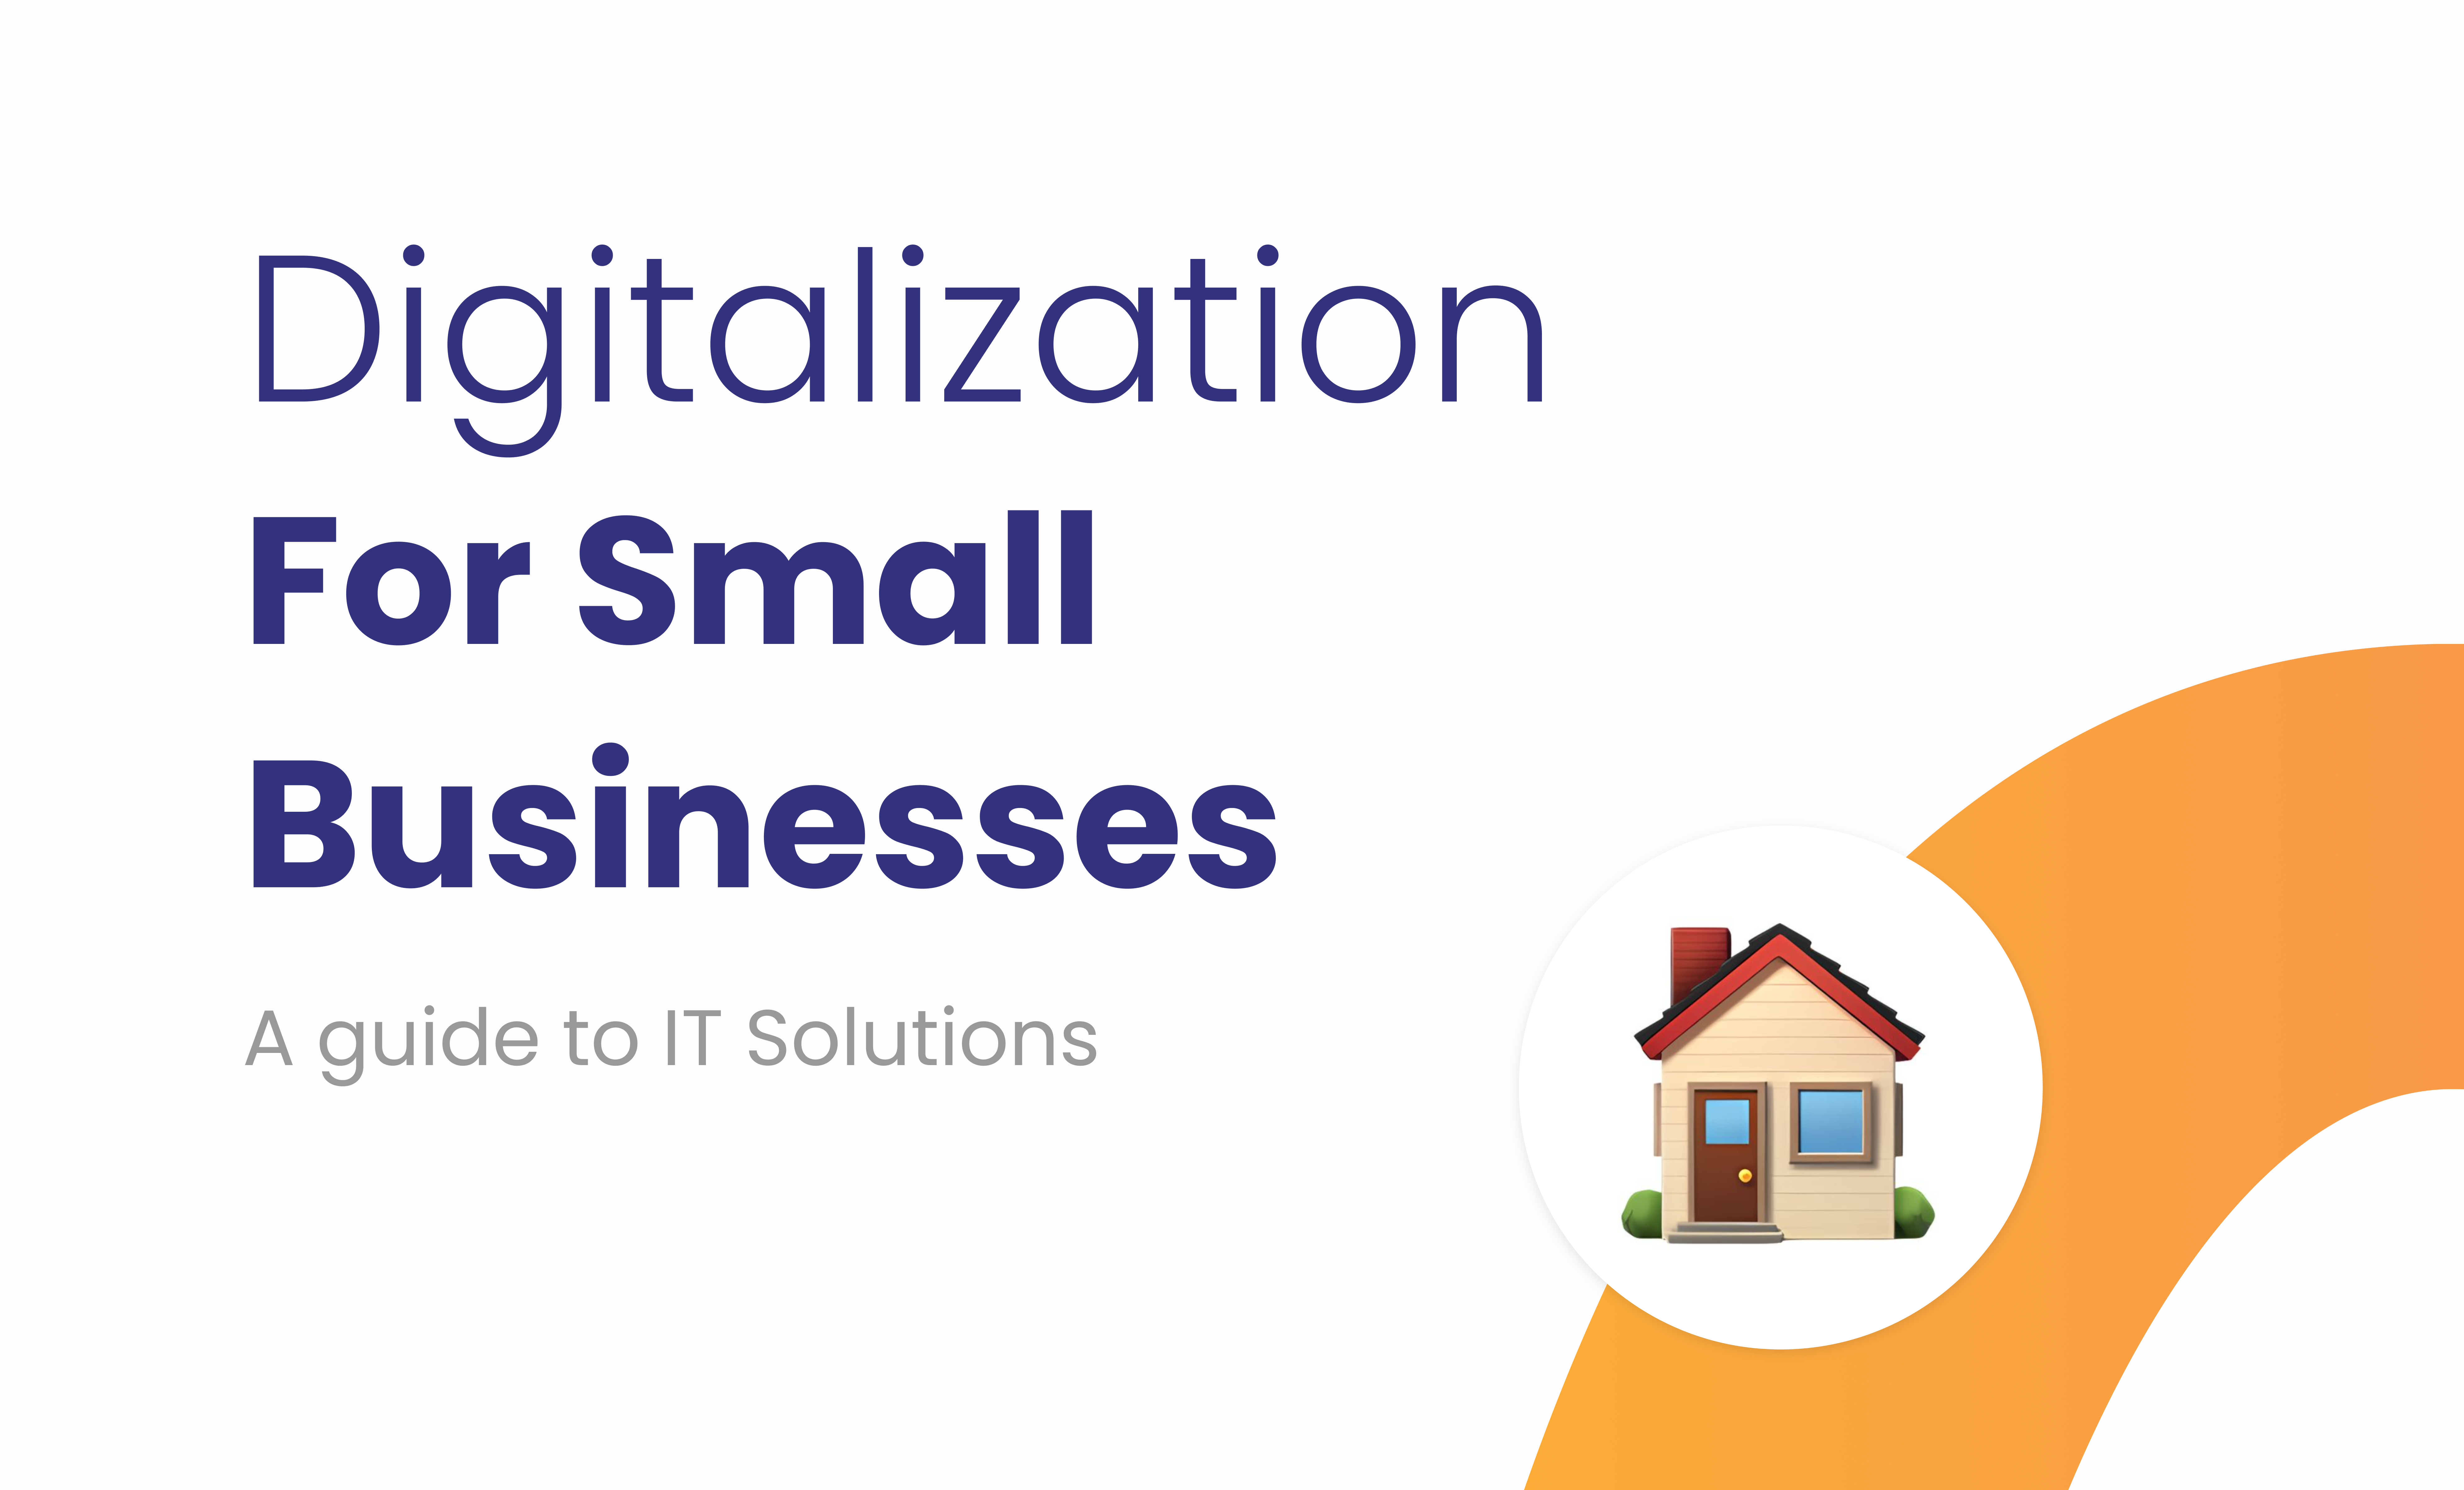 Digitalization for small businesses